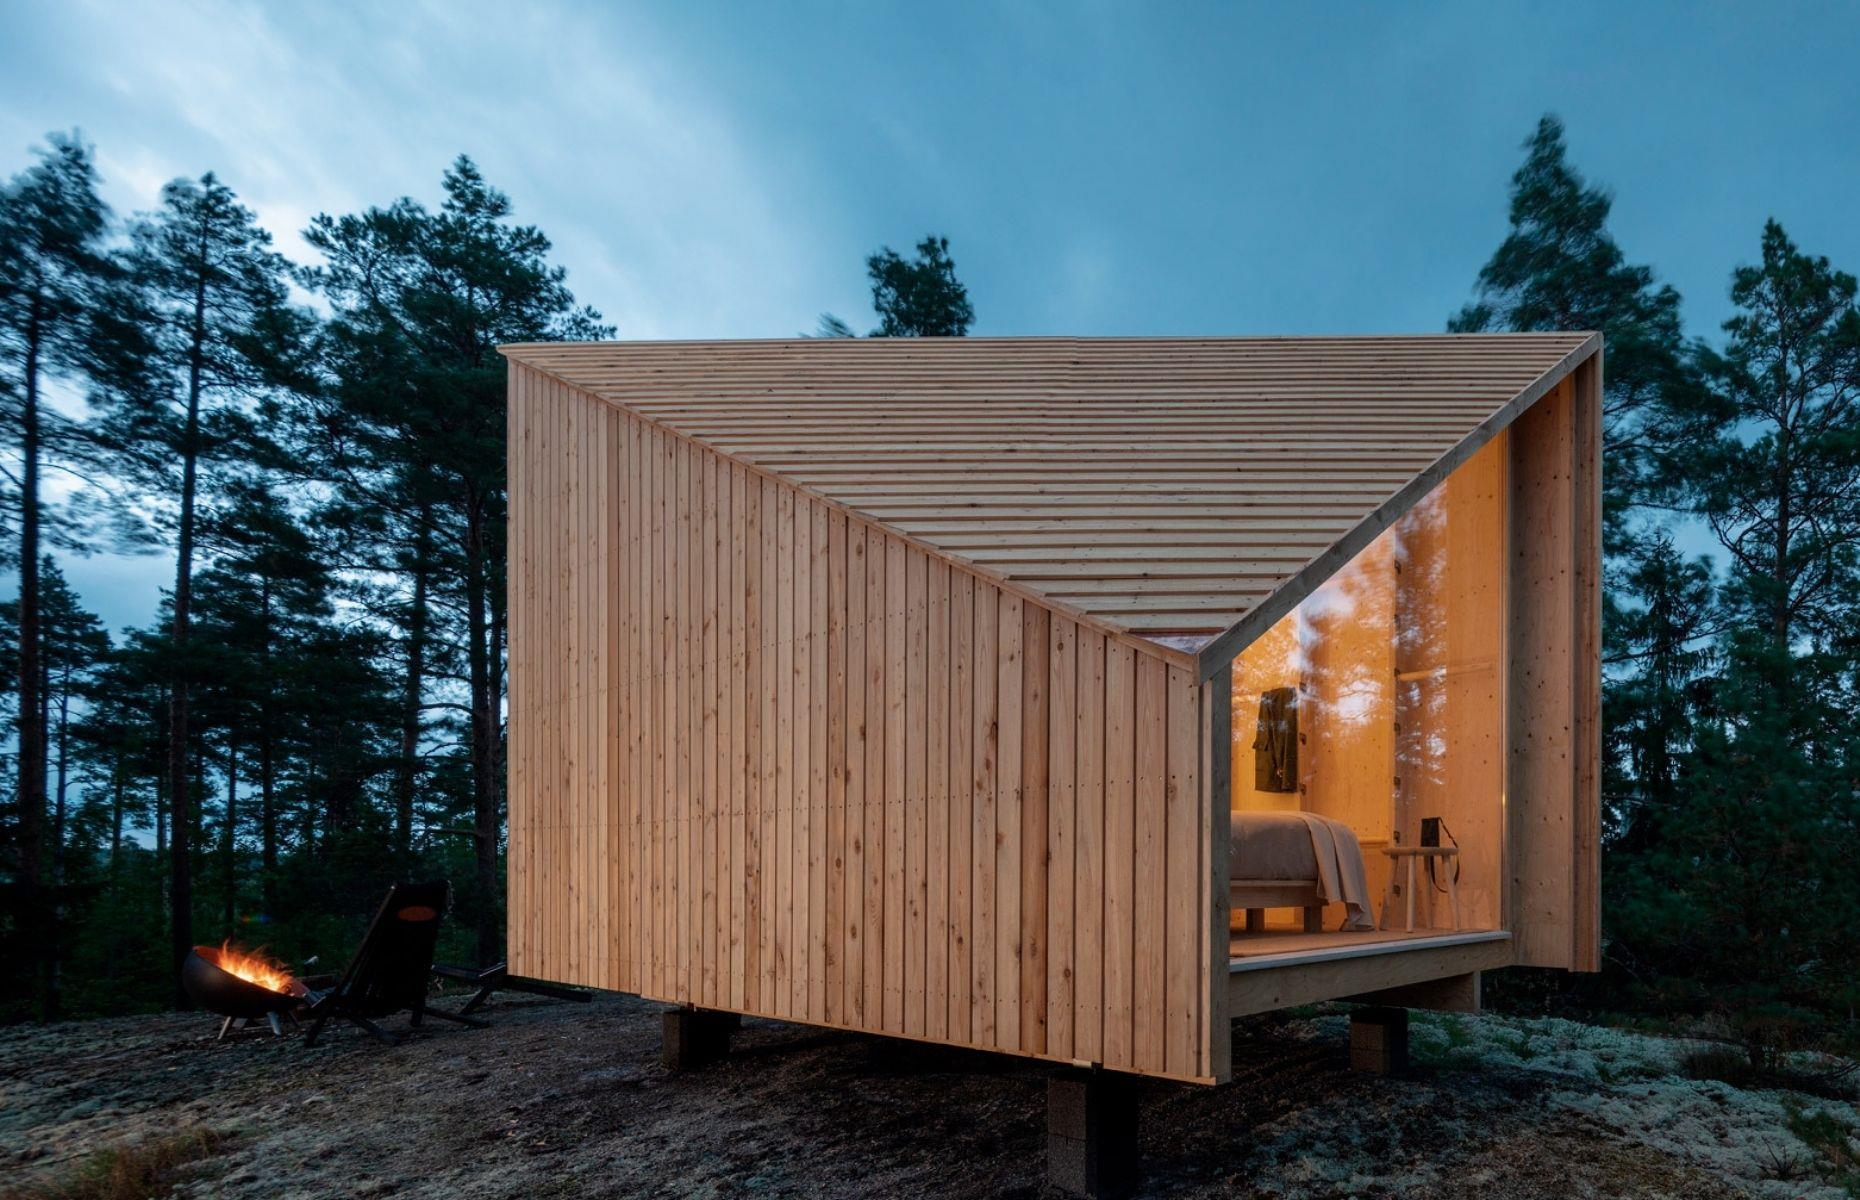 <p>The designers decided to keep the exterior of Space of Mind a blank canvas, while offering the occupier the chance to transform the interior to suit their individual needs.</p>  <p>The compact cabin boasts custom-made furniture, which is attached to the structure of the house via rungs, giving the residents the freedom to tailor the space as they desire. This also makes the modern cabin timeless, meaning it can be modified now, or in 20 years.</p>